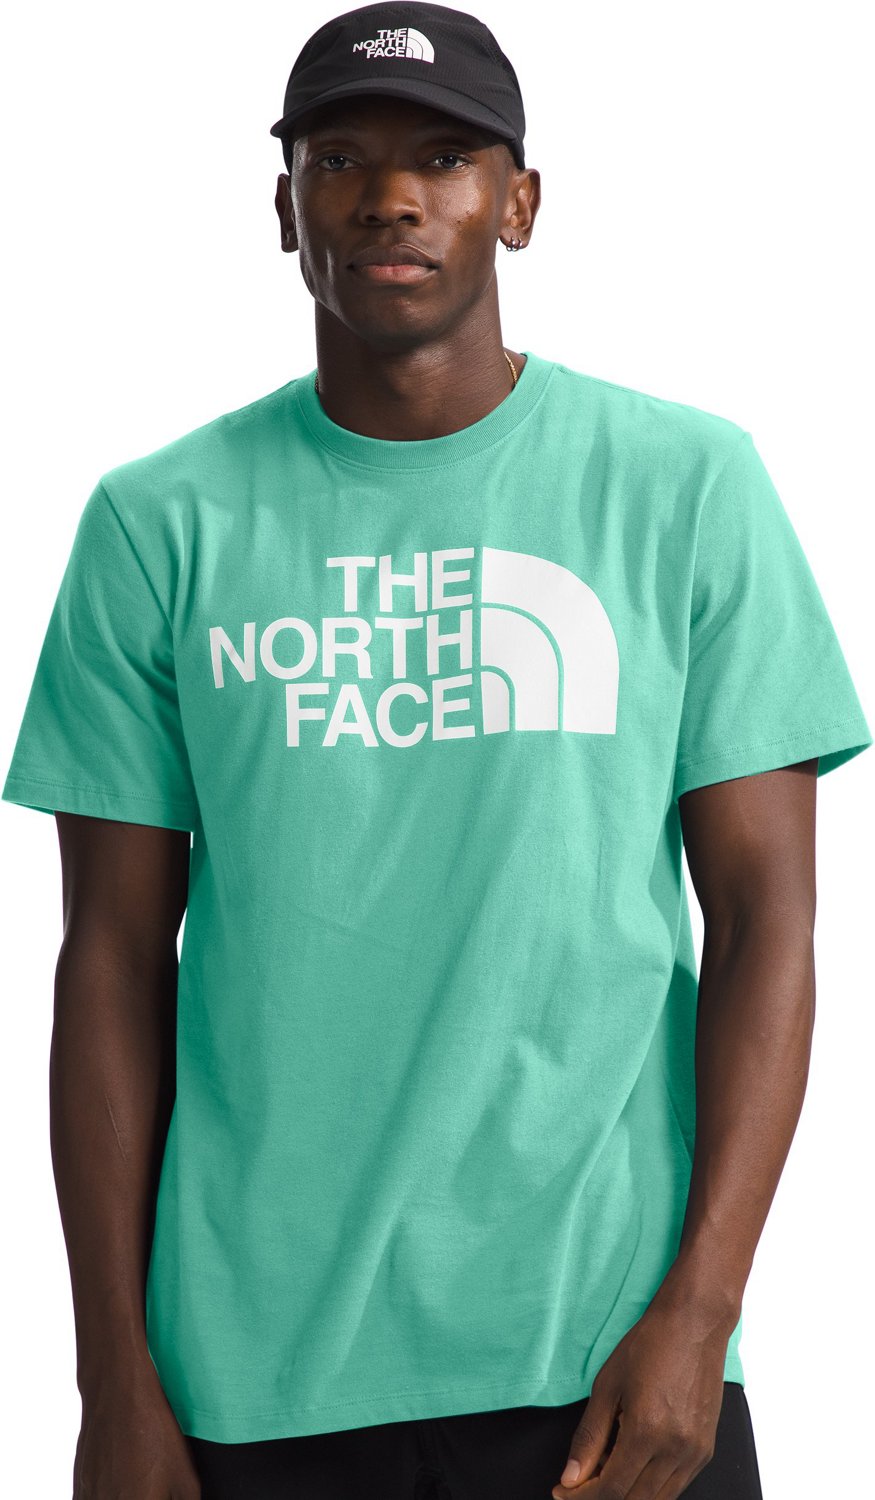 The North Face Mens Half Dome T-shirt